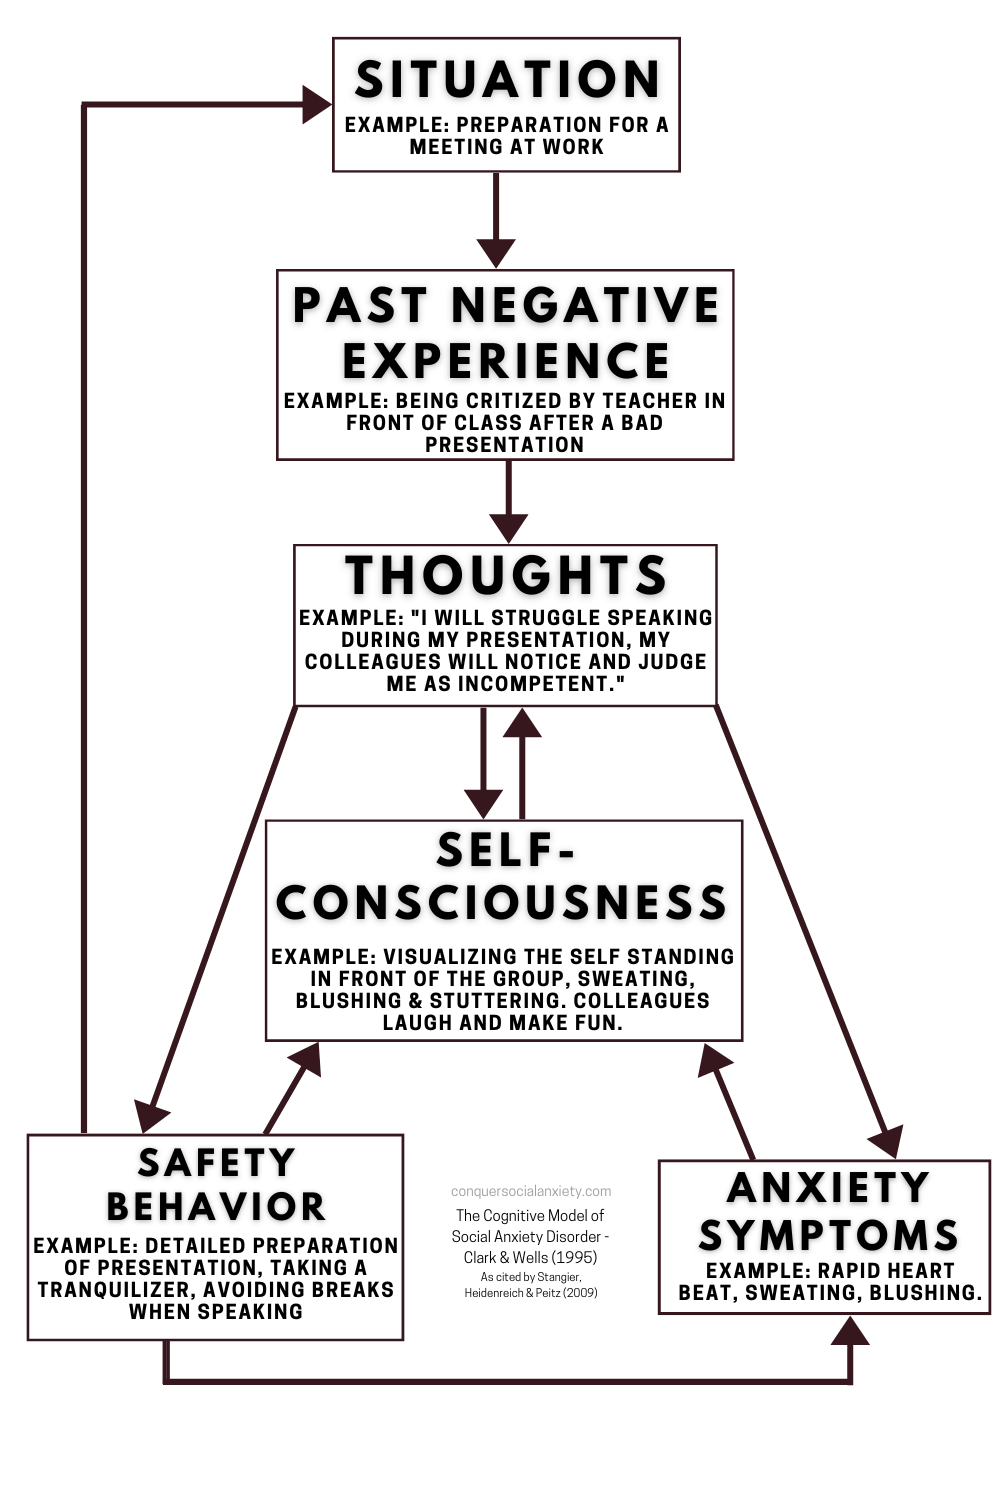 The cognitive model of social anxiety disorder by Clark and Wells (1995).